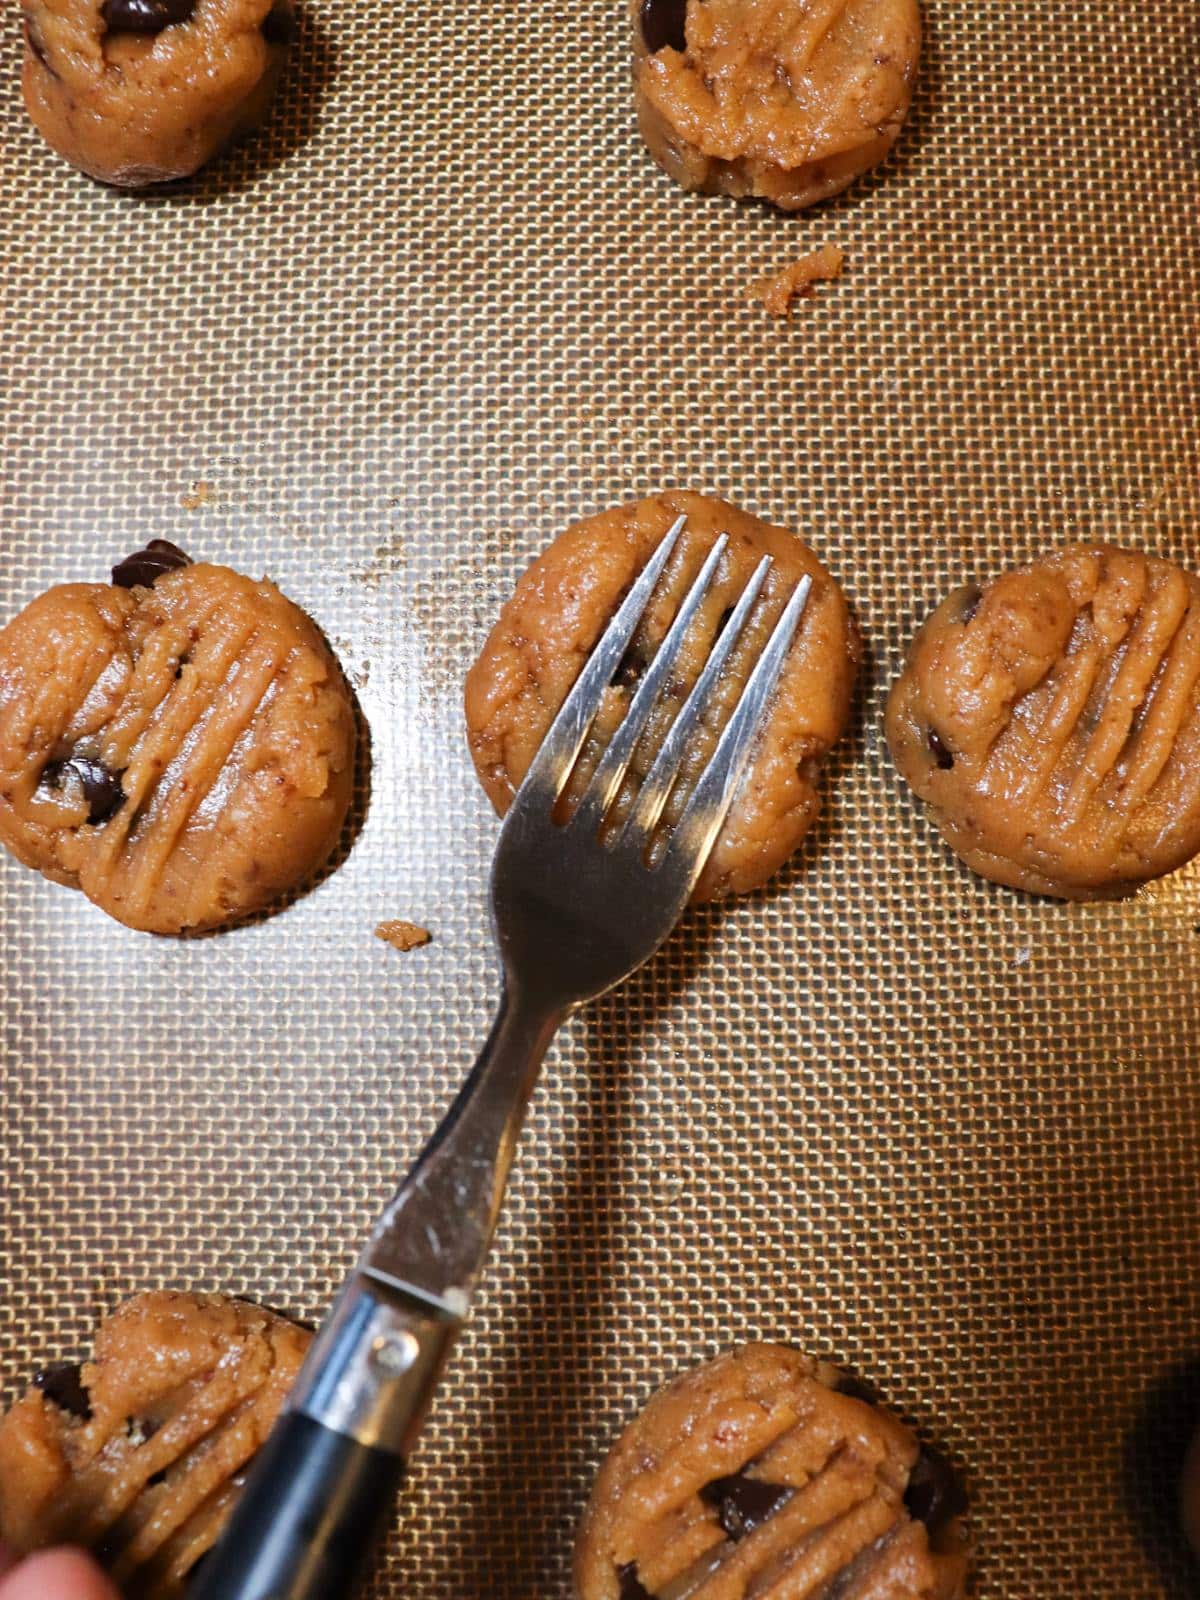 Vegan peanut butter cookie dough balls on a baking sheet getting pressed down and shaped with a fork.